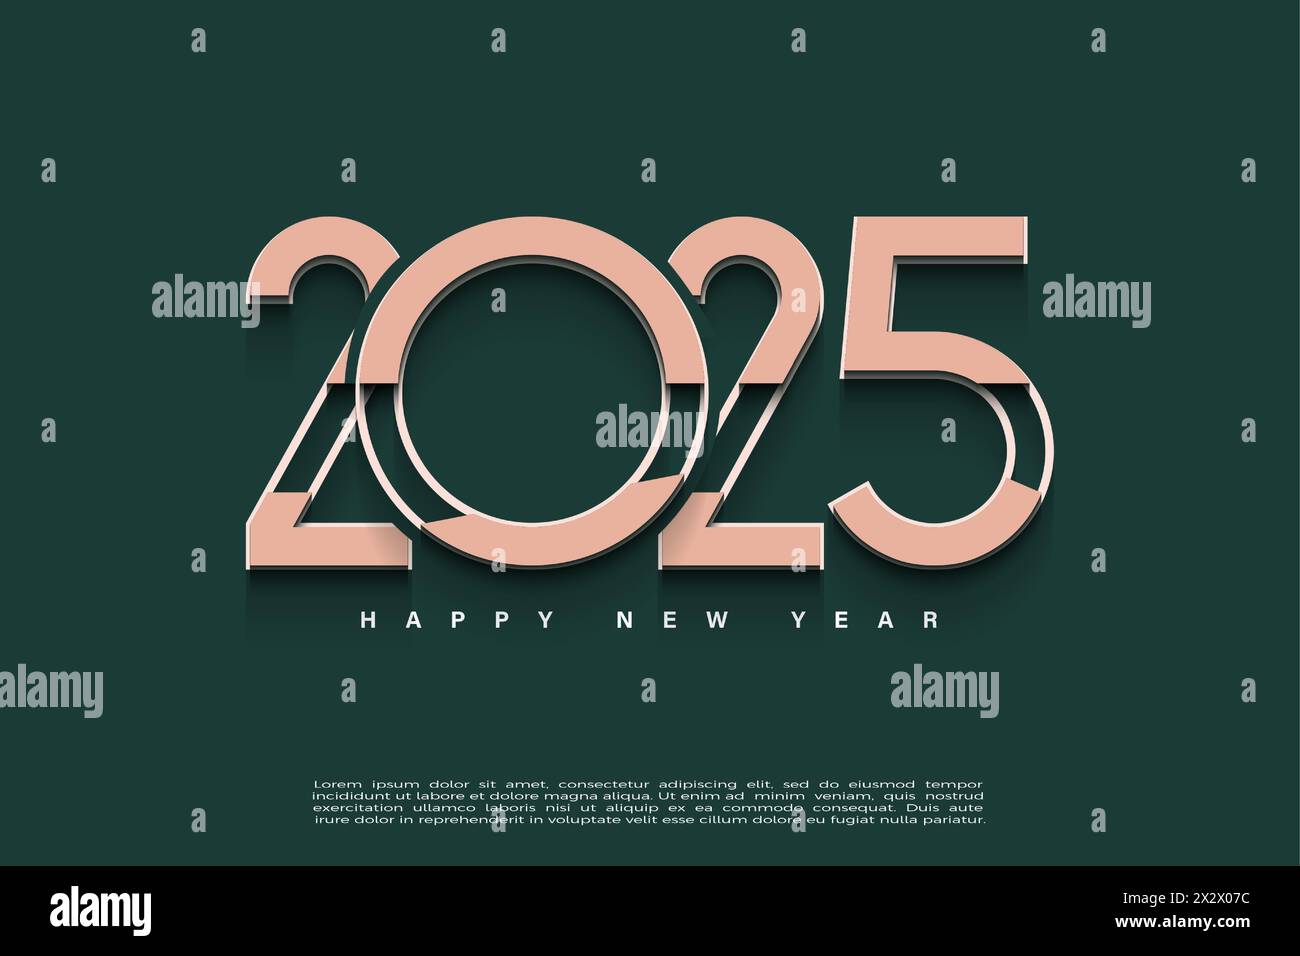 2025 new year with unique numbers and clean background, 2025 new year celebration.for flyers, banners and calendars 2025. Stock Vector